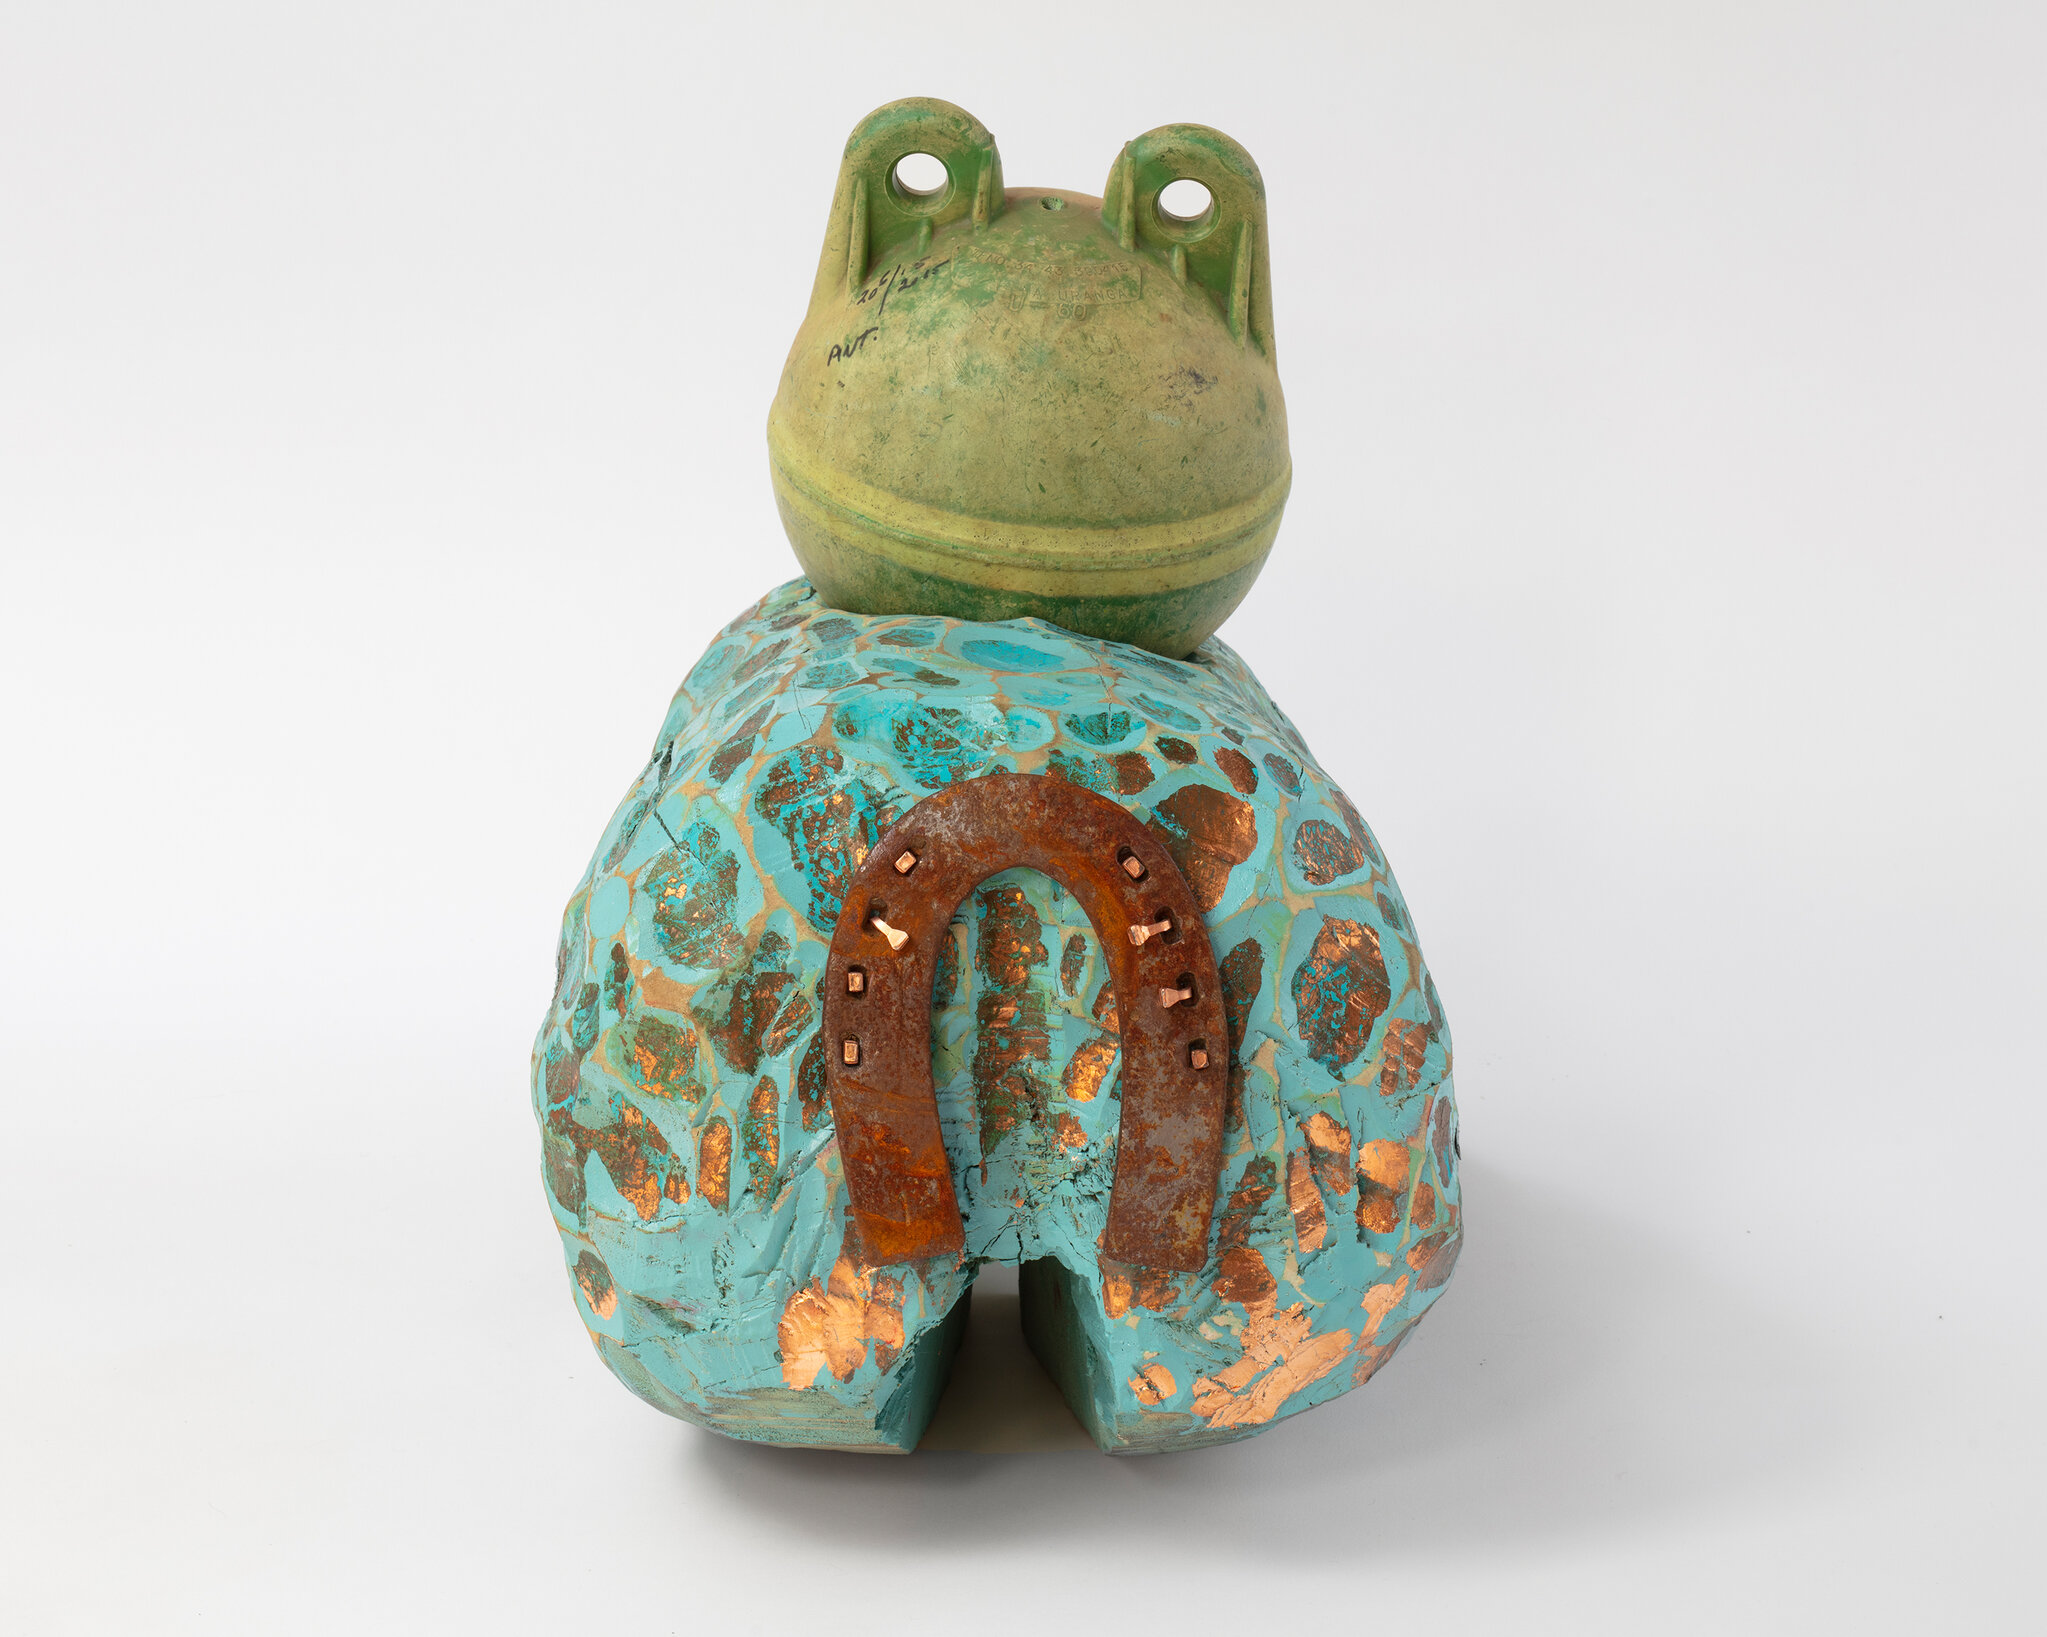 Ramiro Chaves Sapo Mareografo, 2022 Unidentified reclaimed wood toad with oxidized copper leaf application. Recovered plastic marine signaling buoy head. 50 × 35 × 50 cm (19 ⅝ × 13 ¾ × 19 ⅝ inches)